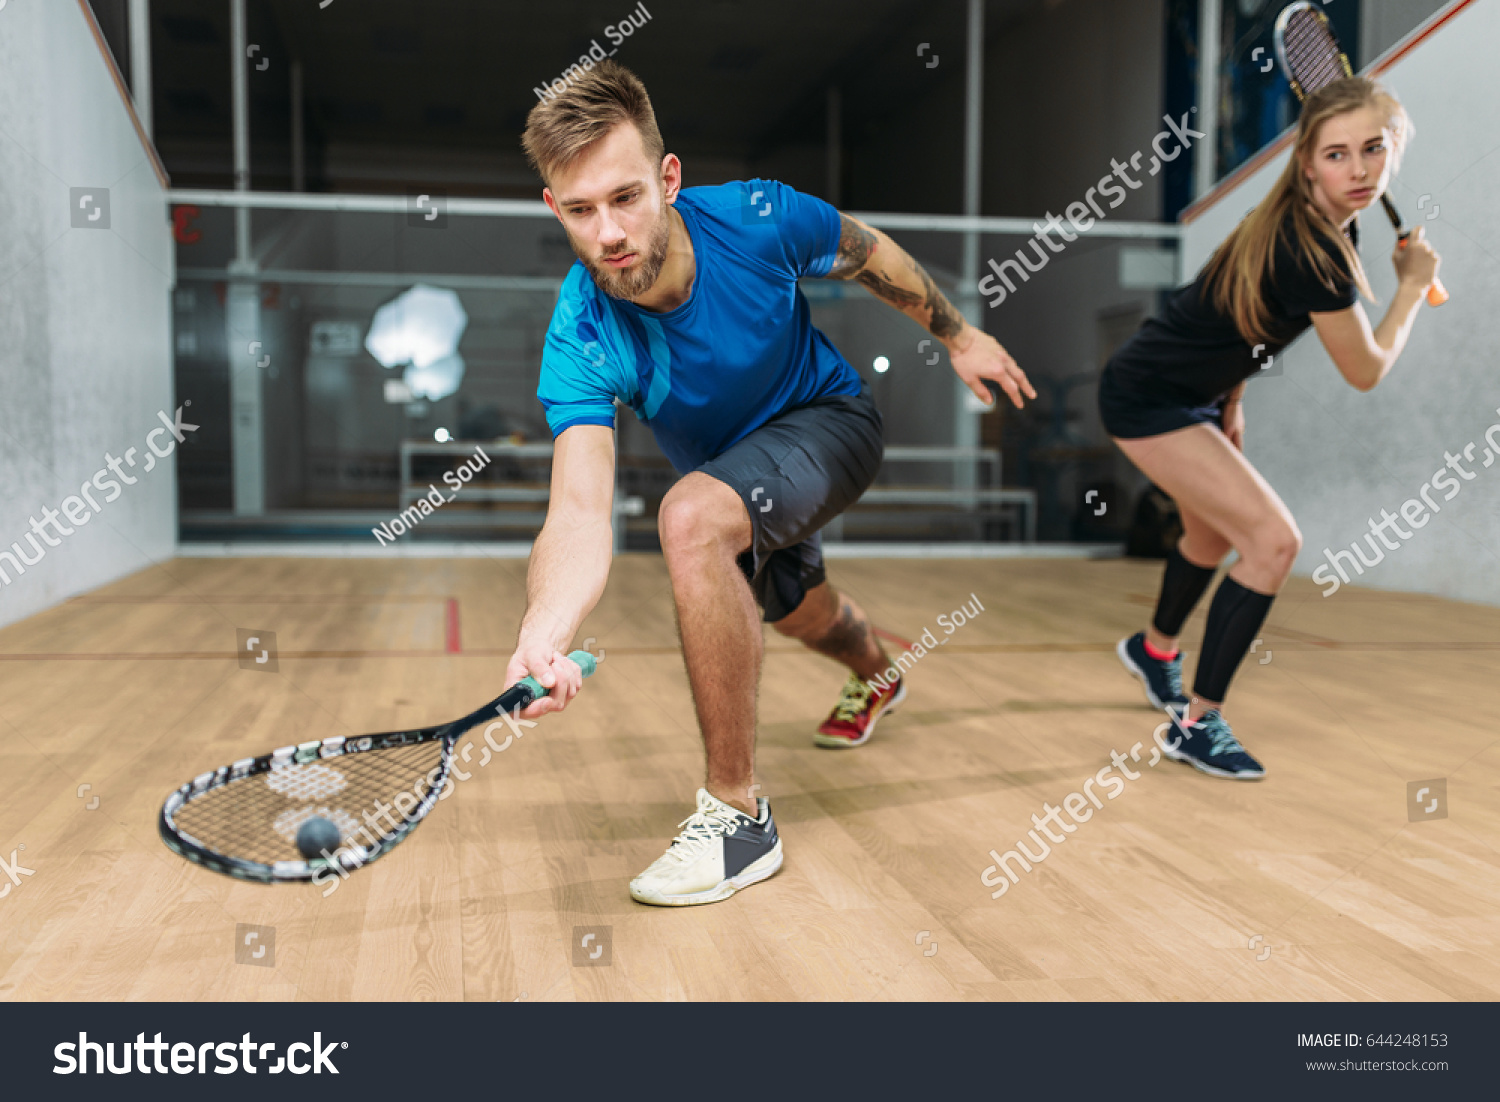 Squash game training, players with rackets #644248153